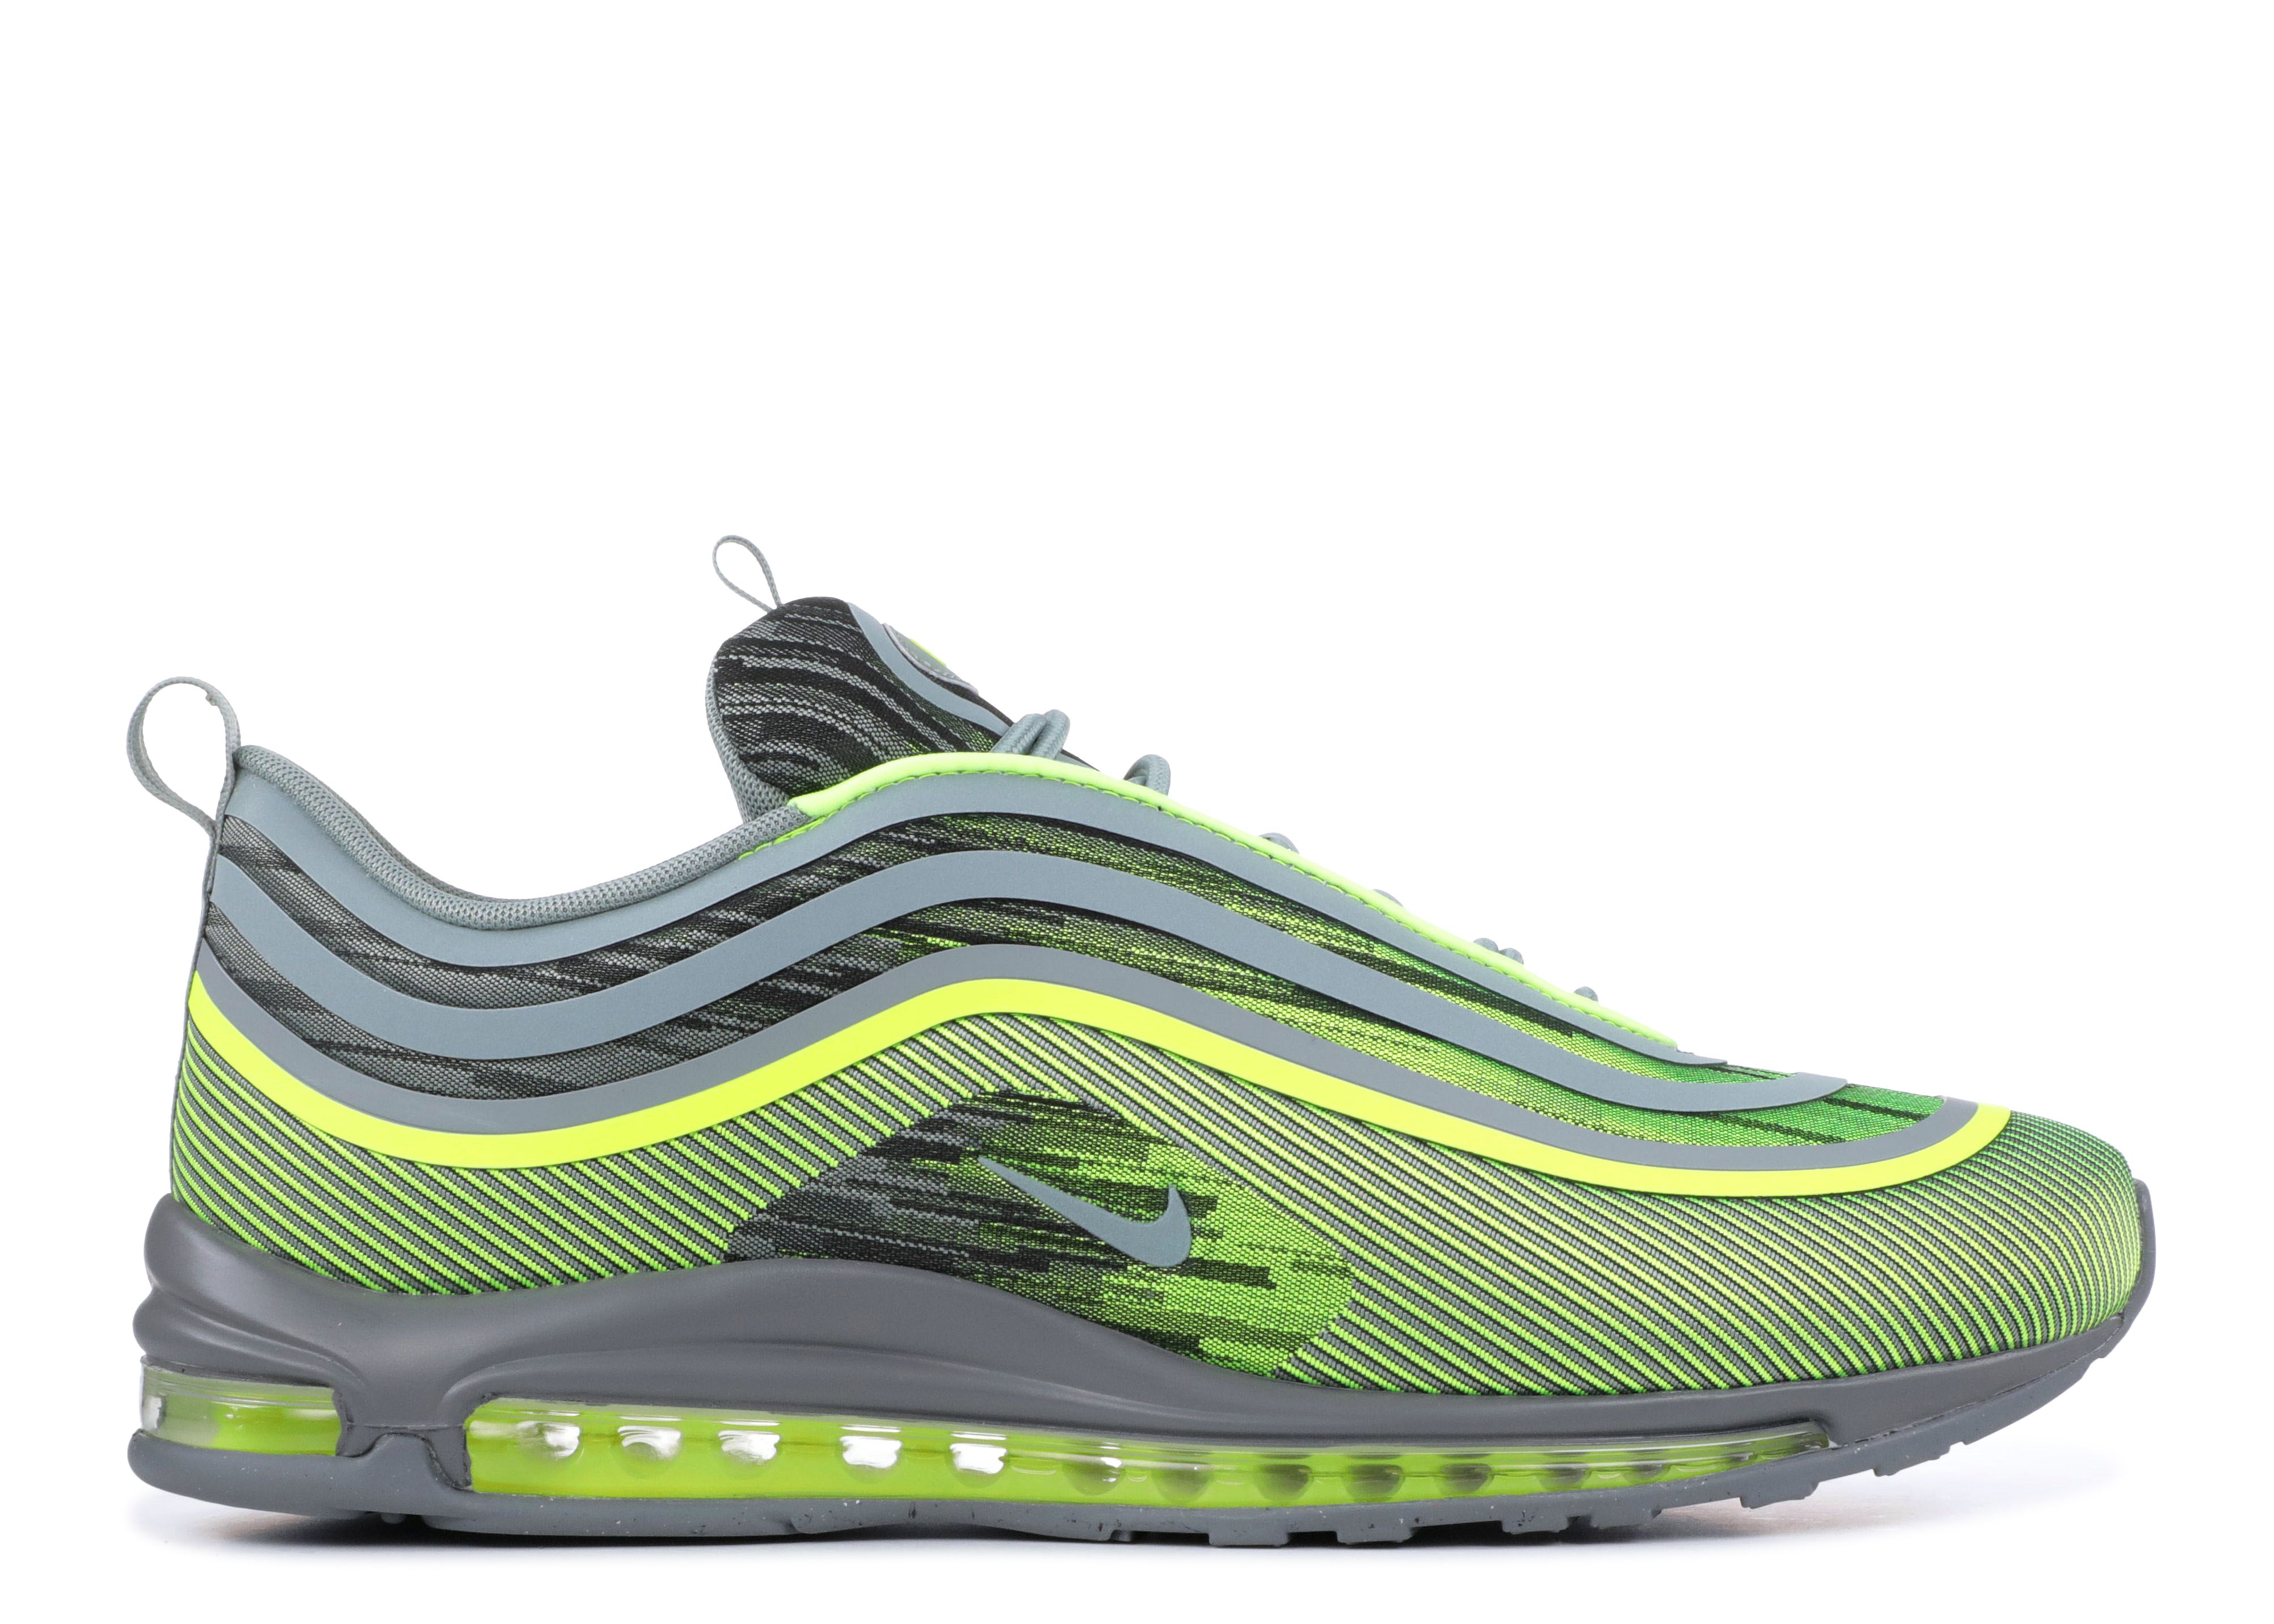 Top 20 Nike Air Max 97 releases. Sole Animal